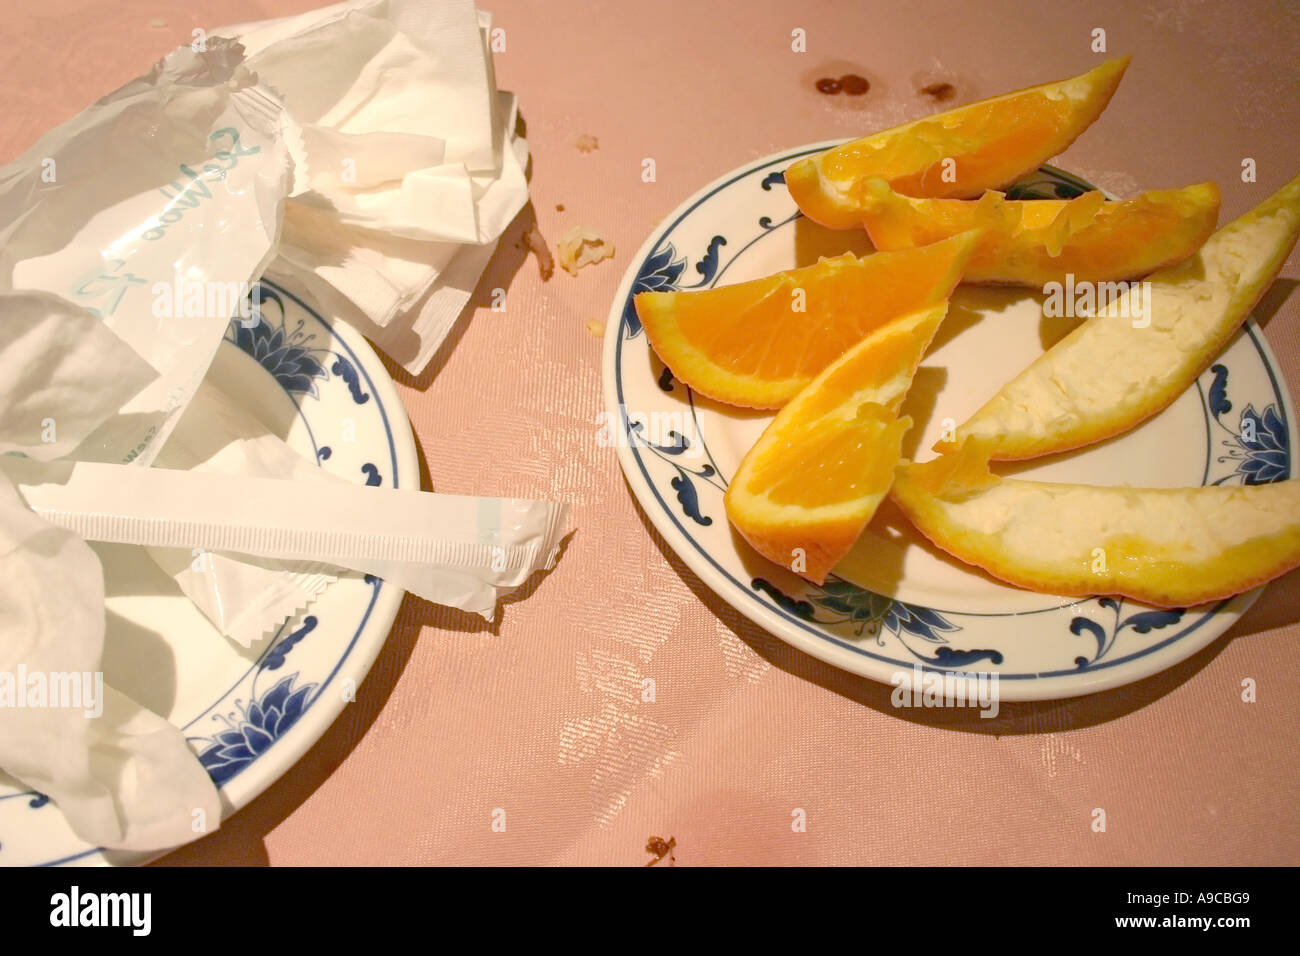 leftover orange segments after chinese meal Stock Photo